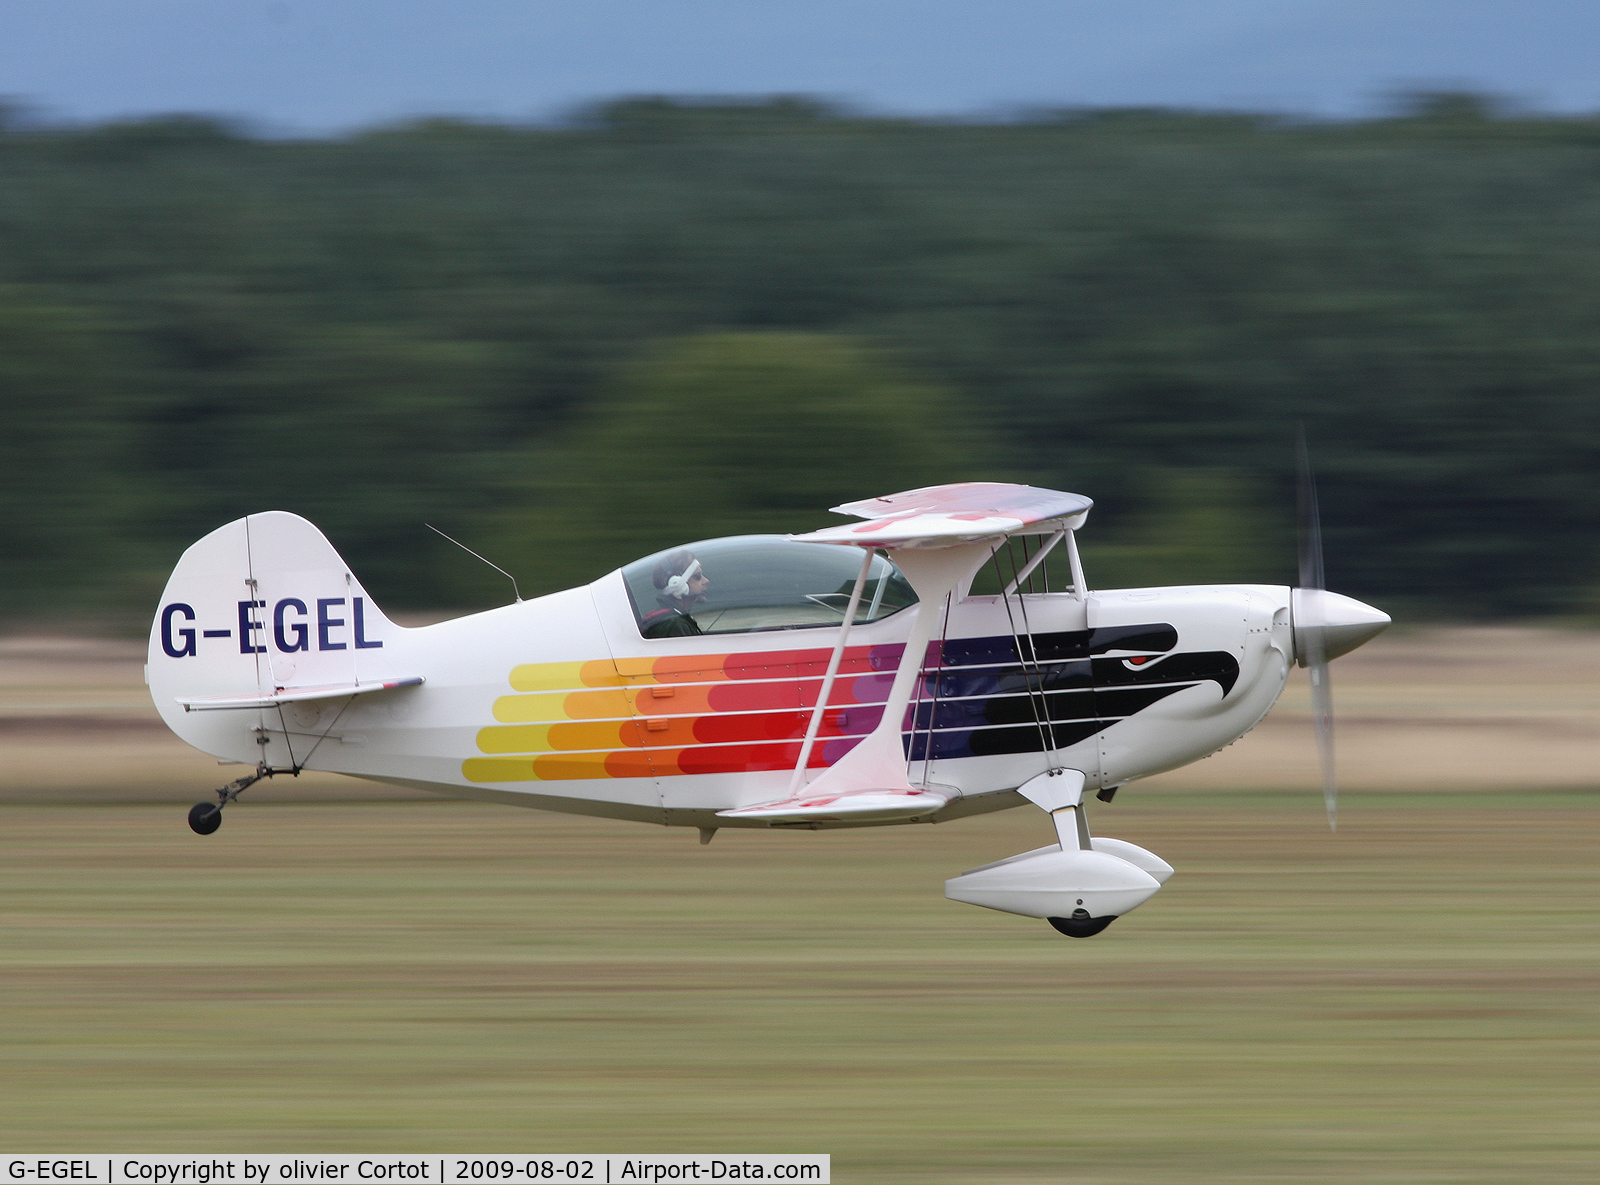 G-EGEL, 1991 Christen Eagle II C/N S308, taking off at the mulhouse airshow